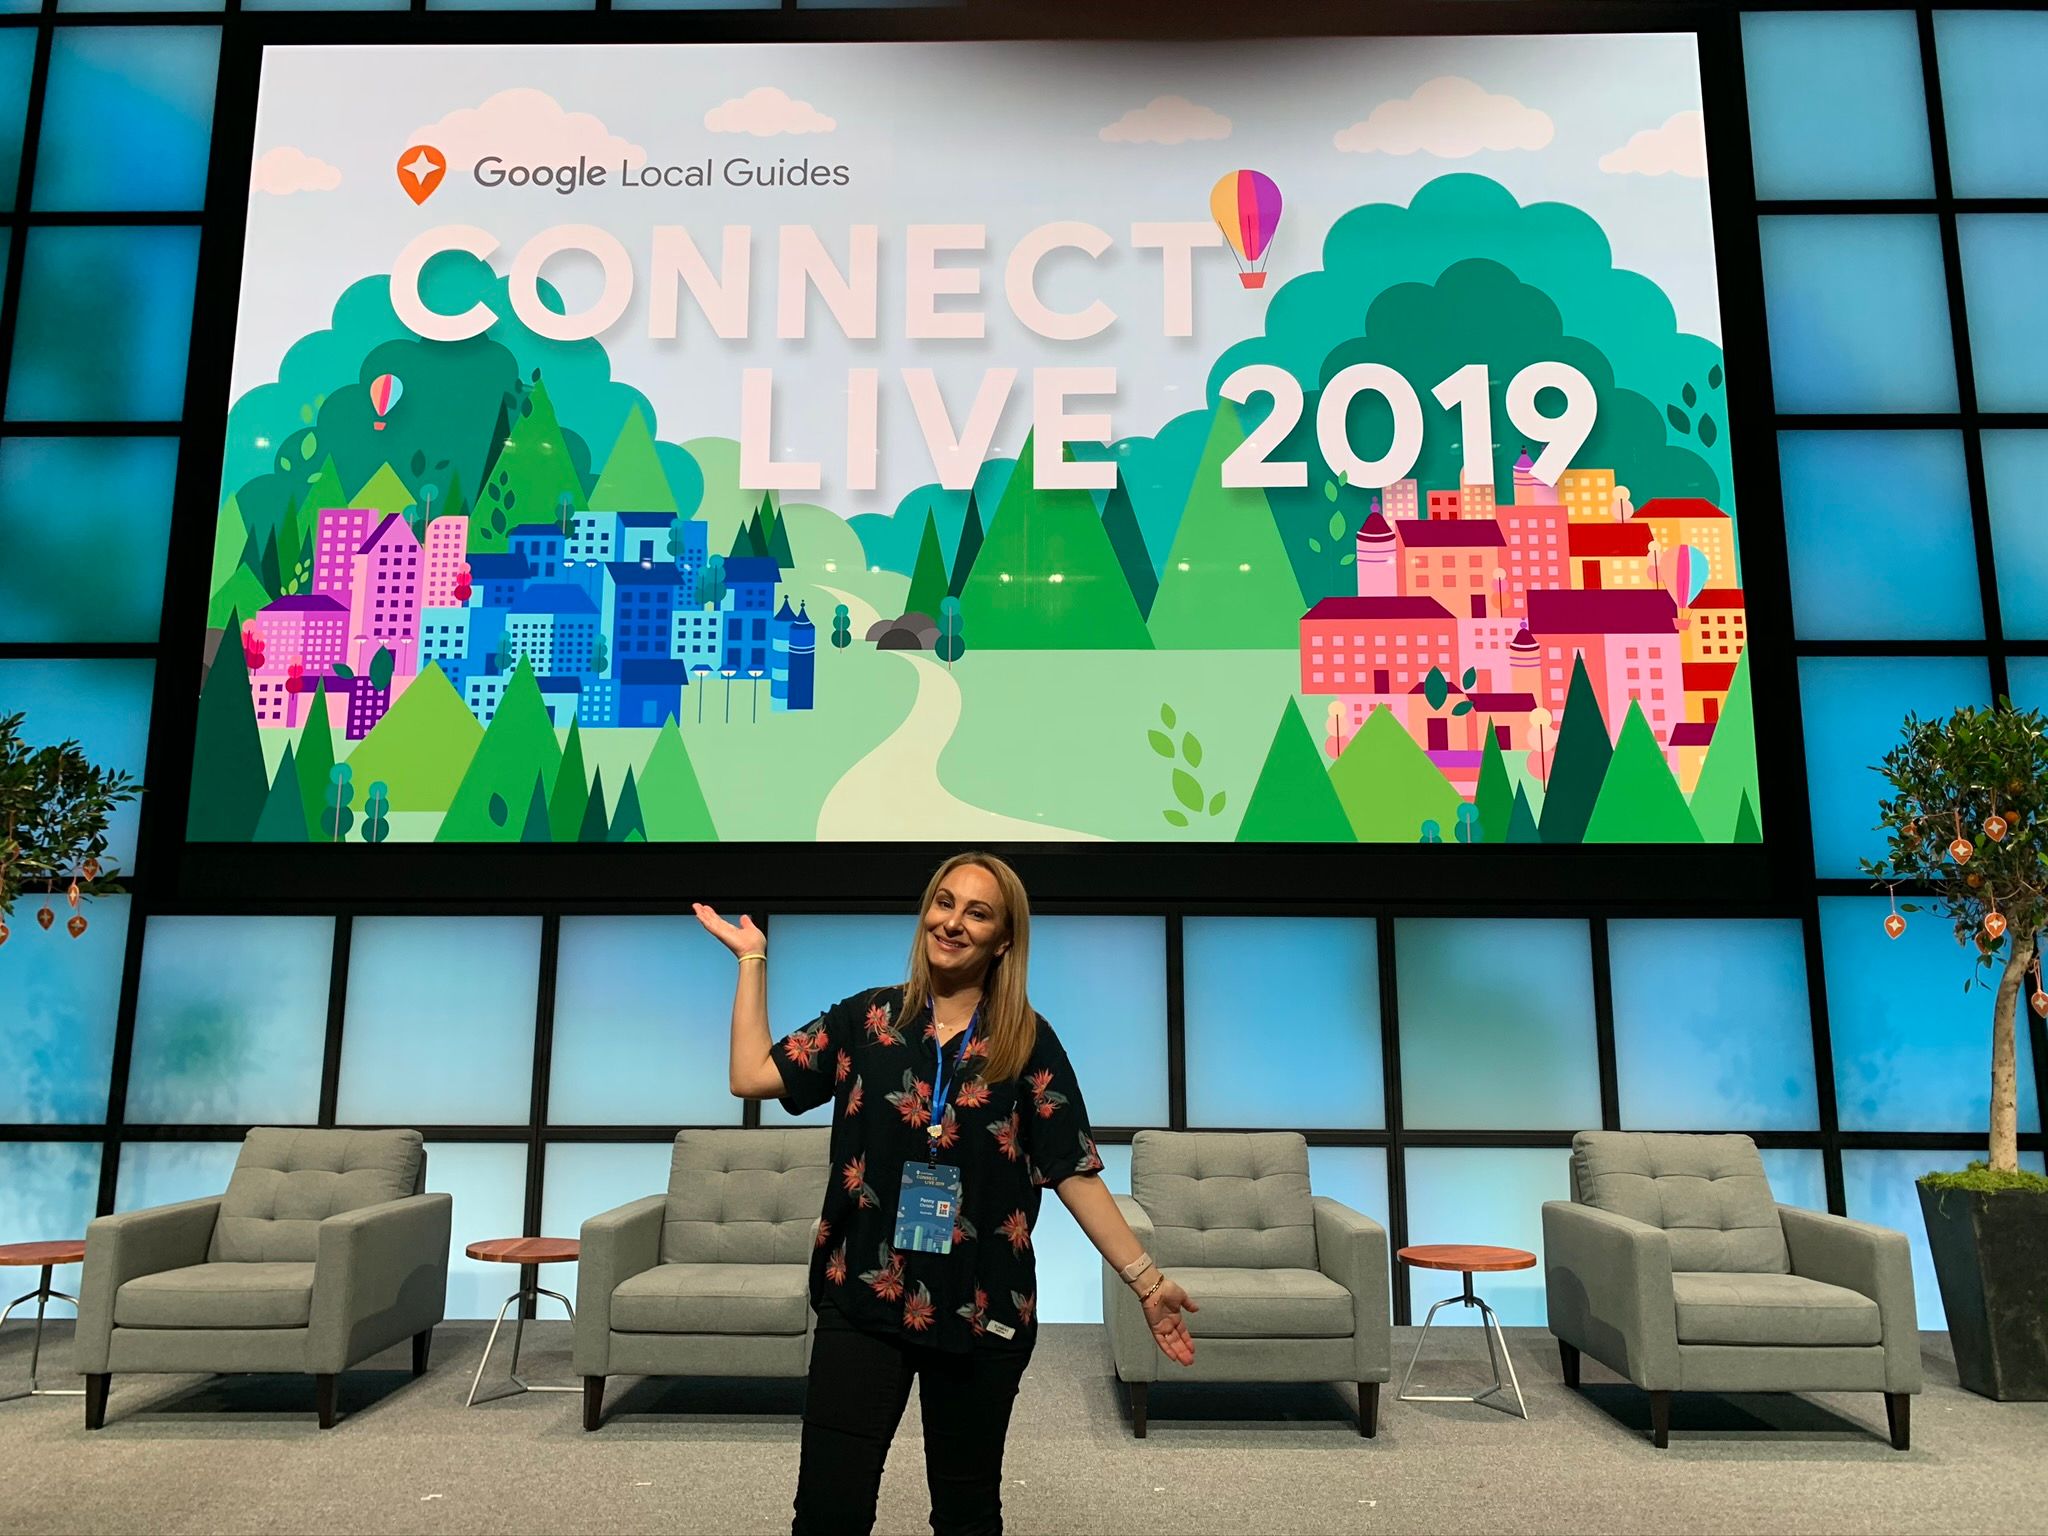 Caption: A photo of Penny posing in front of a big screen with the text “Google Local Guides, Connect Live 2019” on it. (Courtesy of Local Guide @PennyChristie)